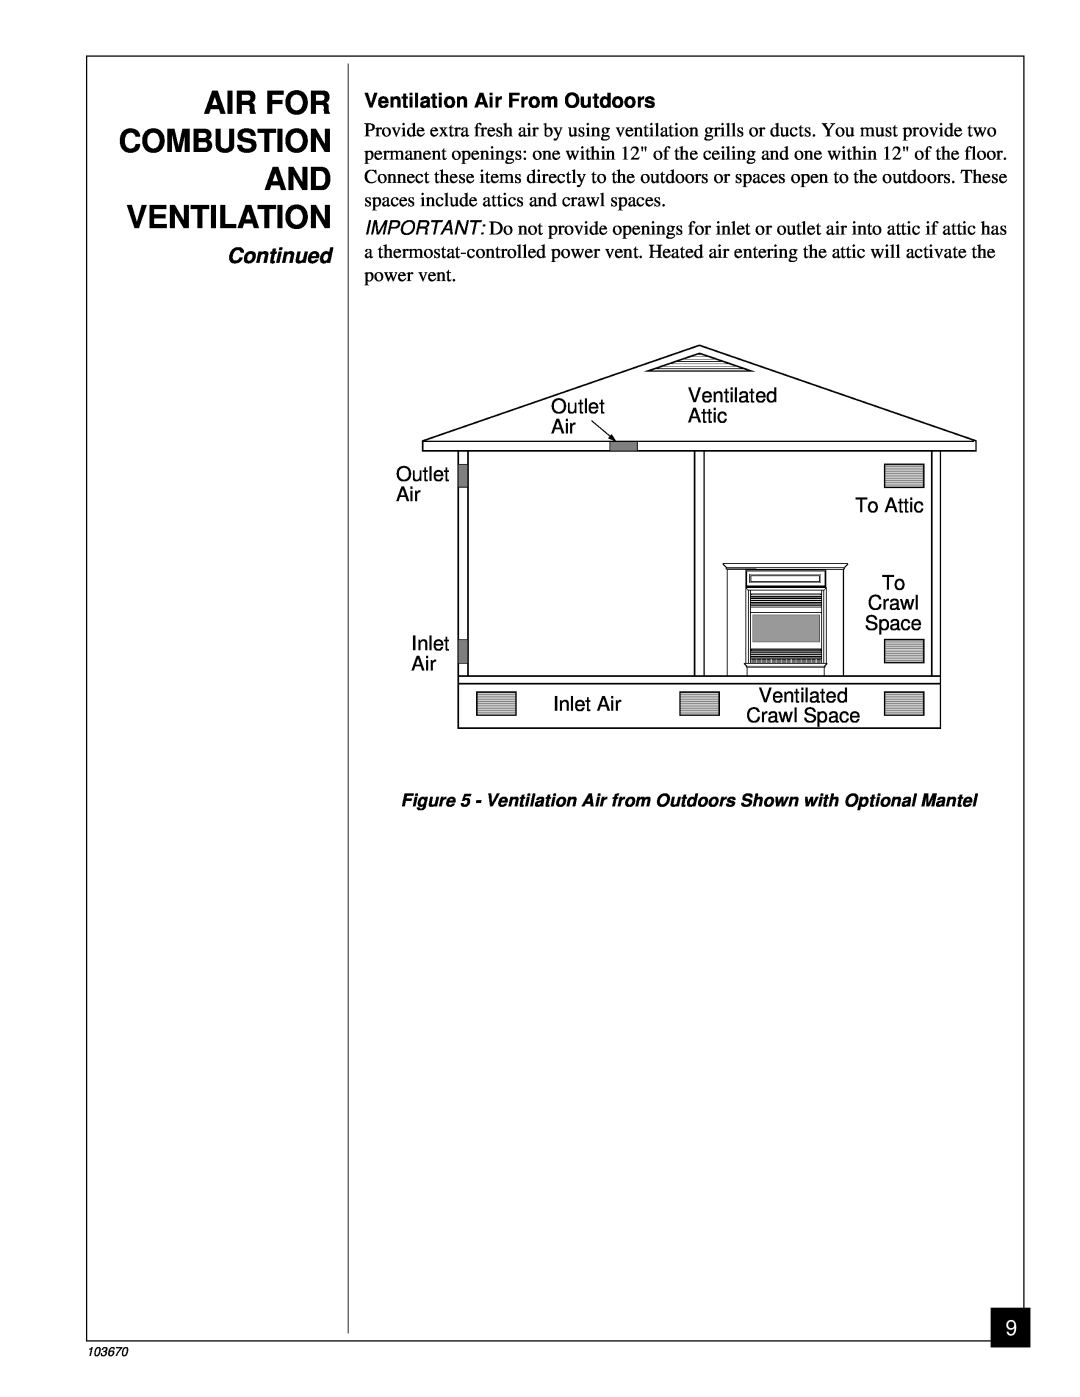 Vanguard Heating VMH10TN installation manual Air For Combustion And Ventilation, Continued, Ventilation Air From Outdoors 